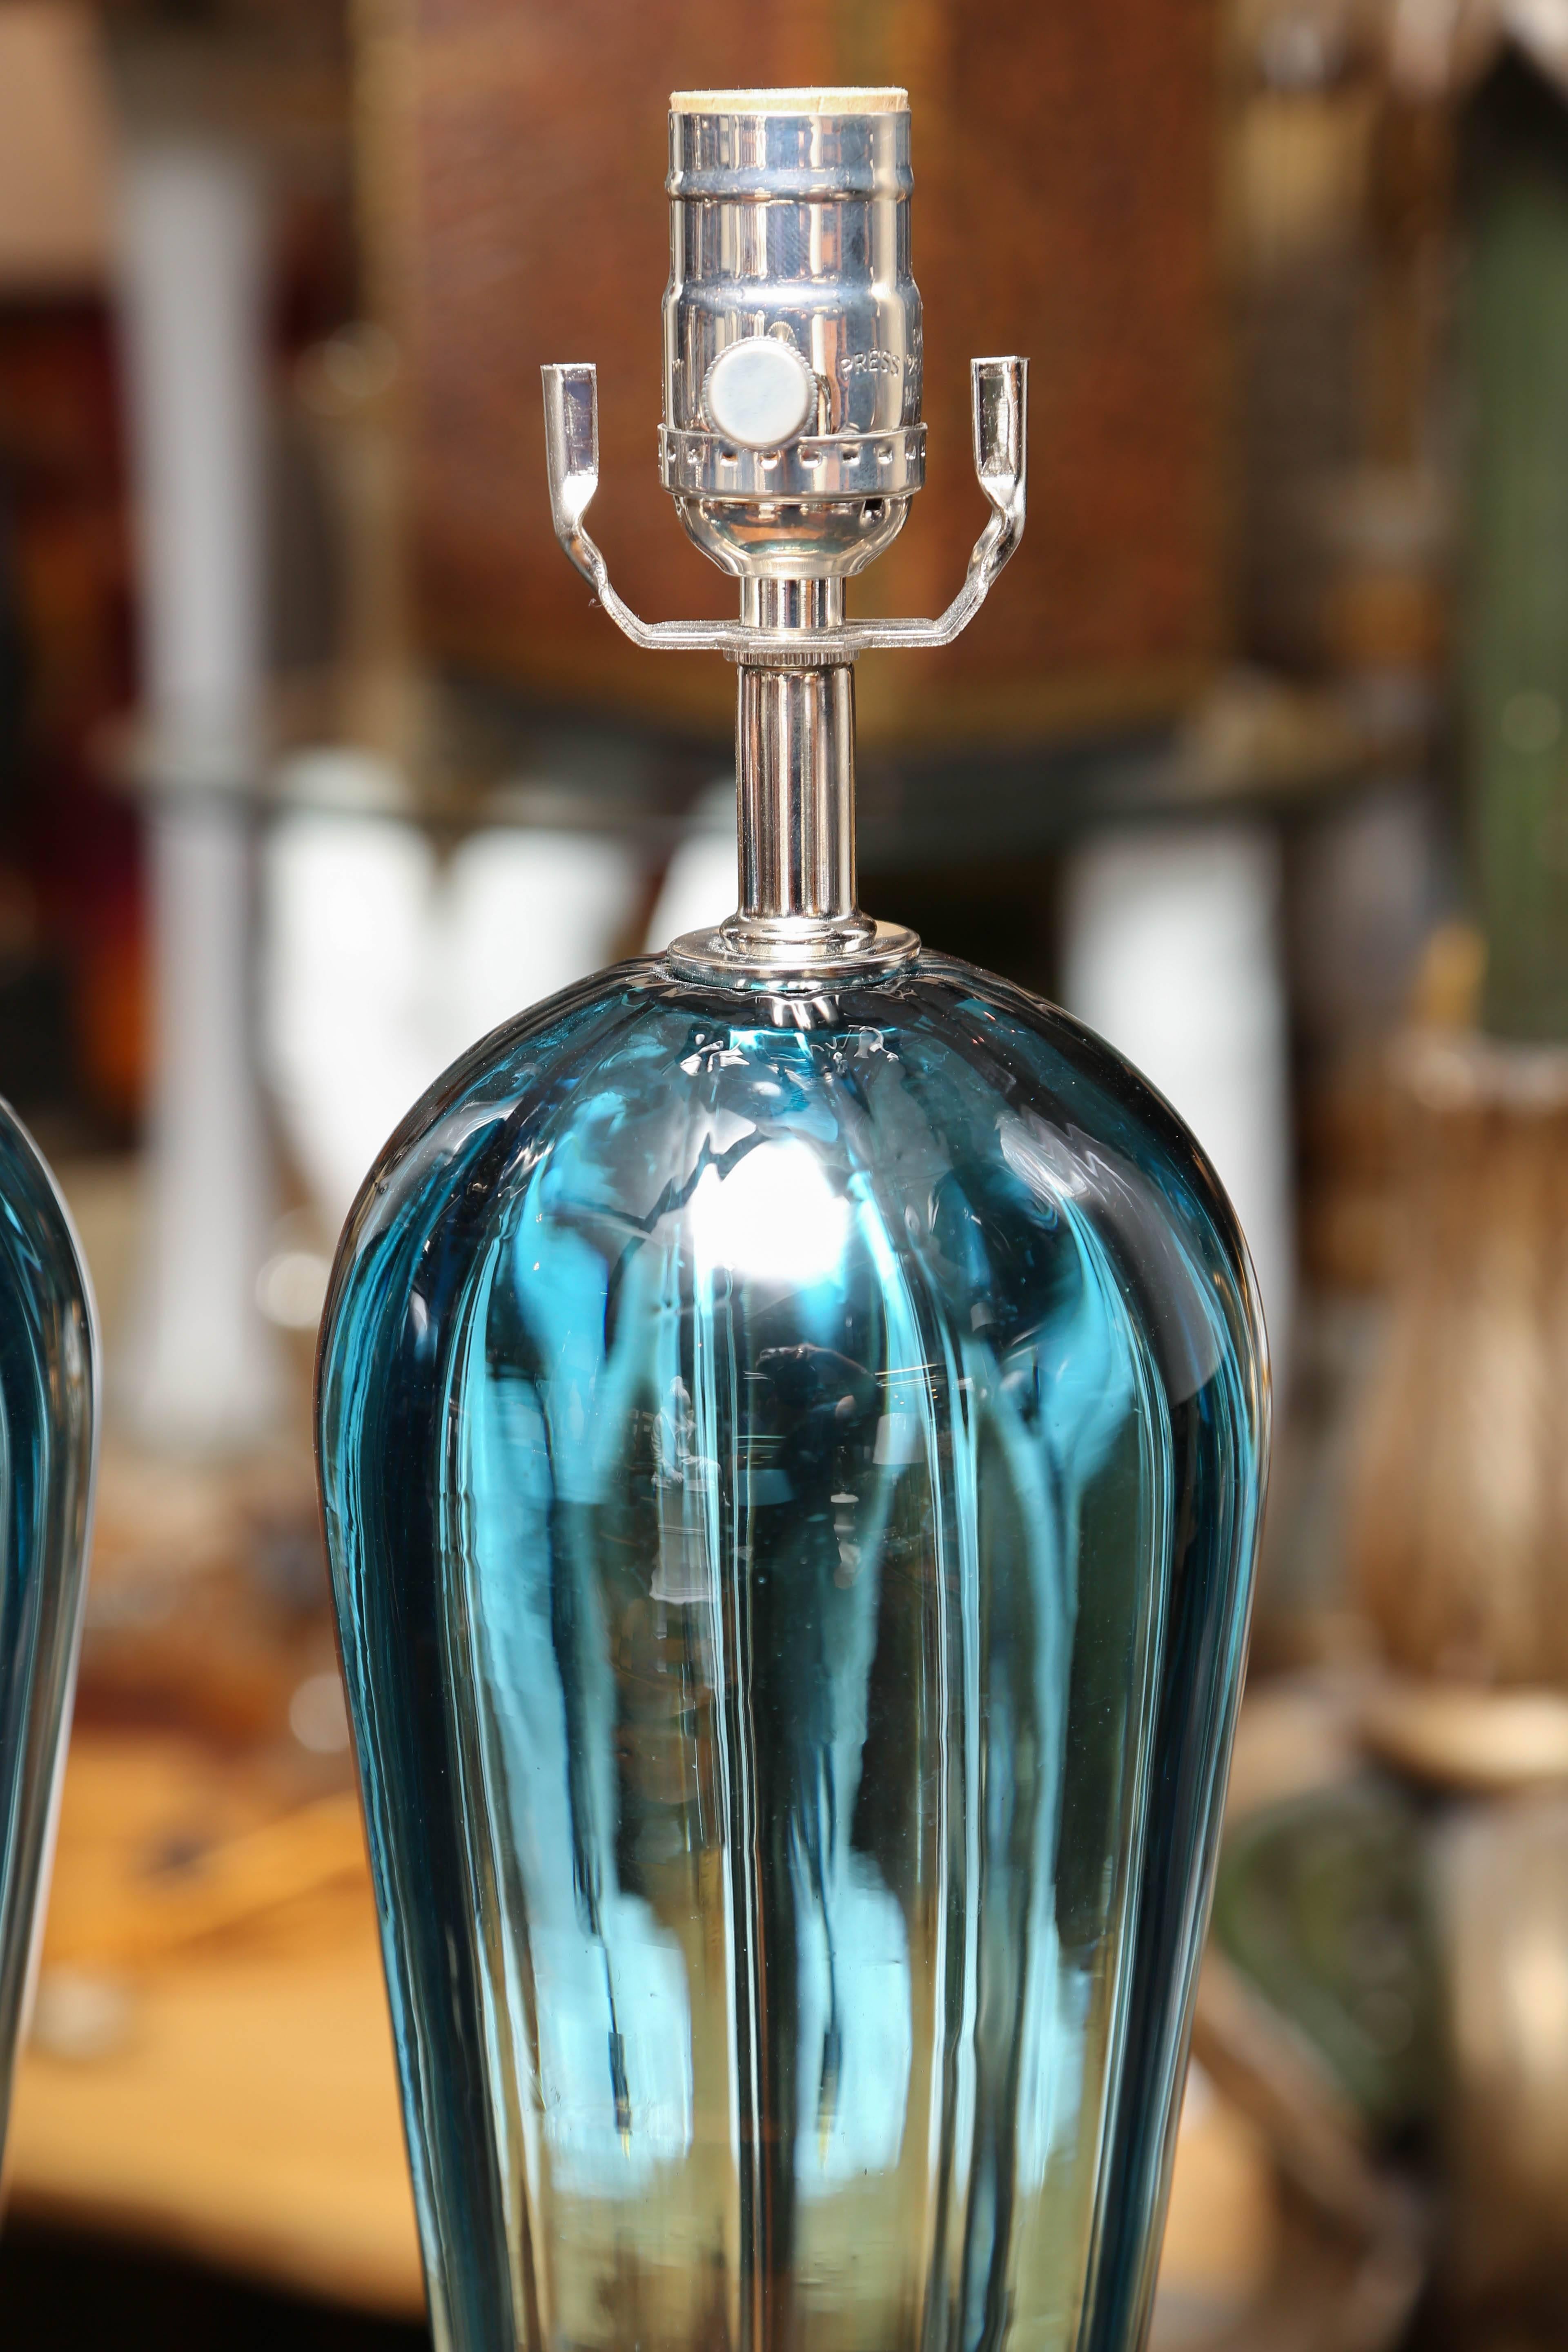 An elegant and stately pair with long tapered bodies and outstanding teal blue color.
The lamps are raised upon stepped-up lucite bases.